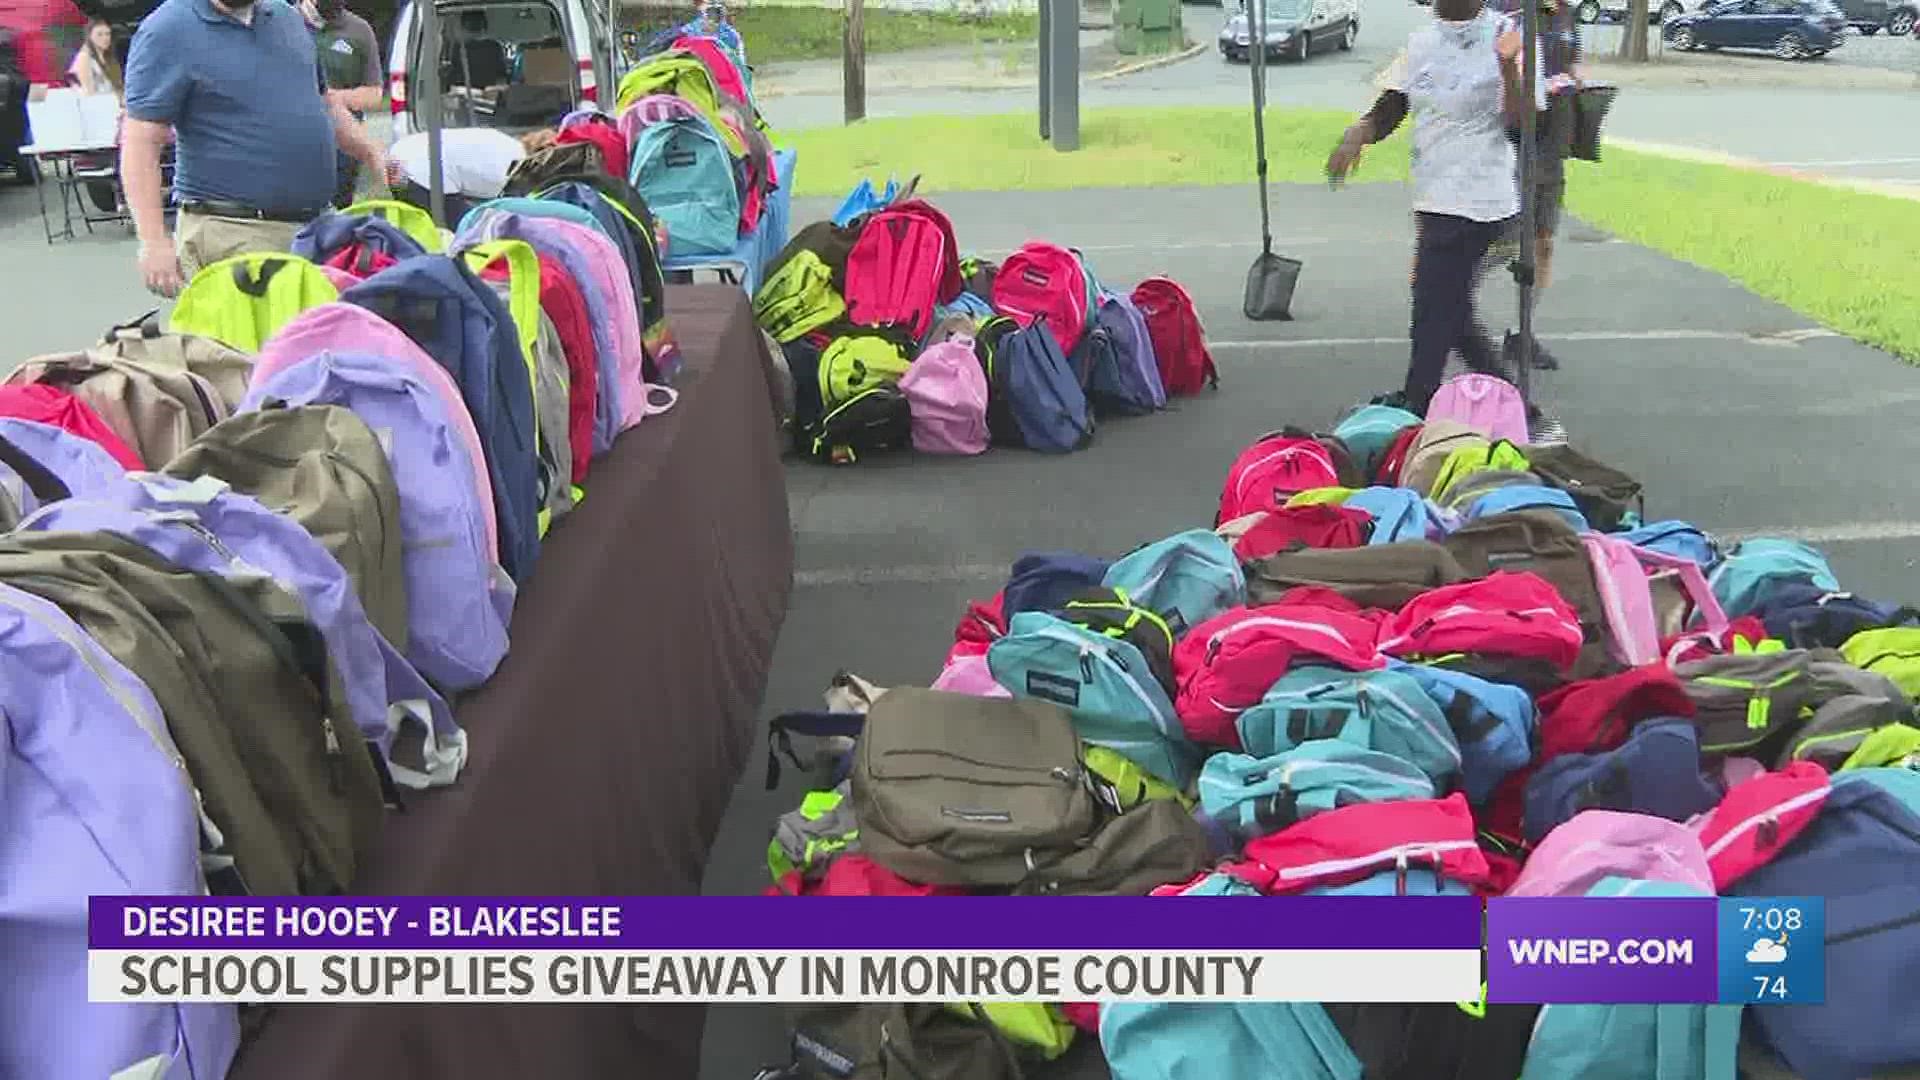 Students received everything from school supplies and backpacks to oral hygiene and snacks at a giveaway in Monroe County.